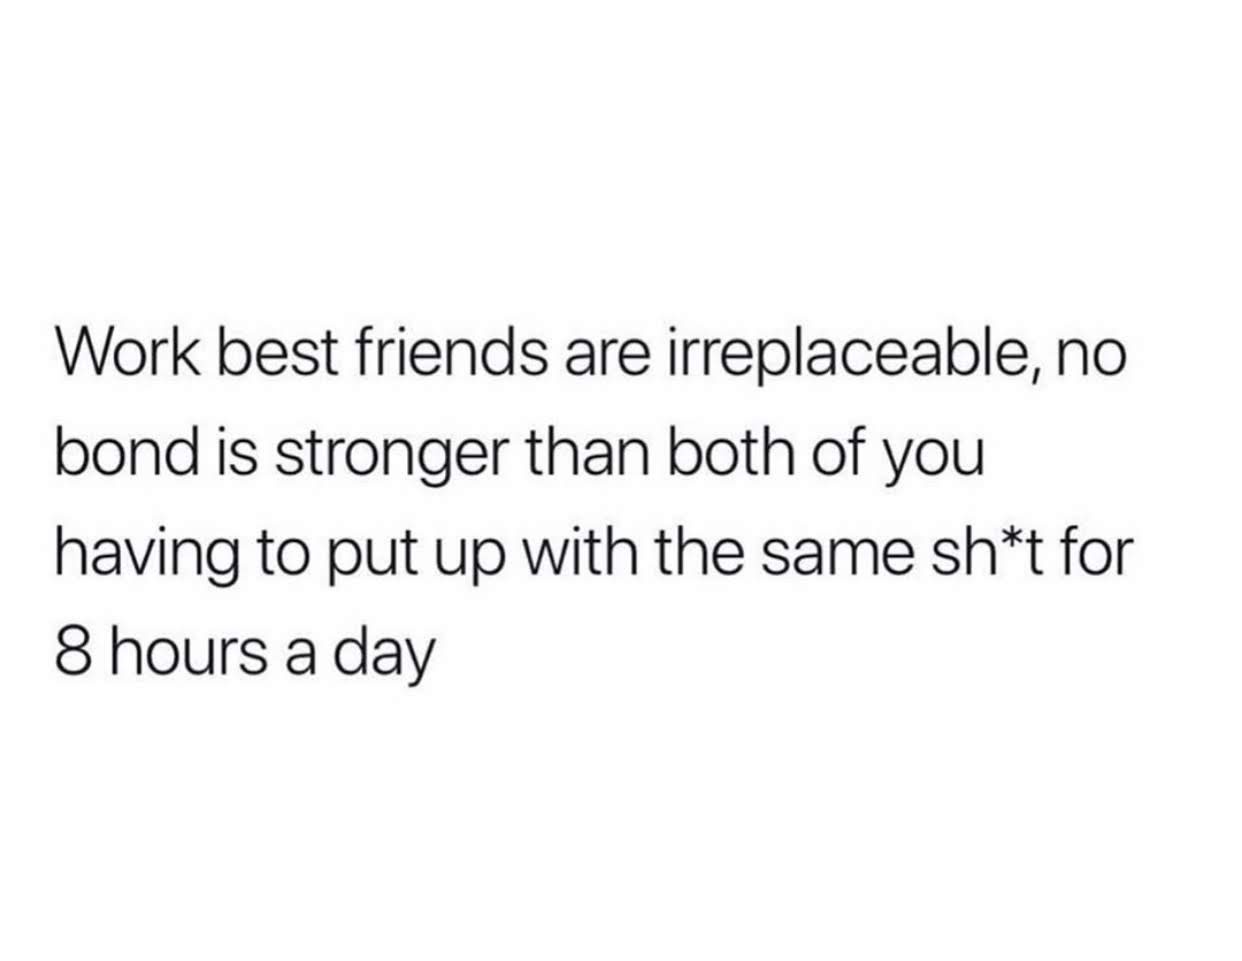 quotes about being used aesthetic - Work best friends are irreplaceable, no bond is stronger than both of you having to put up with the same sht for 8 hours a day